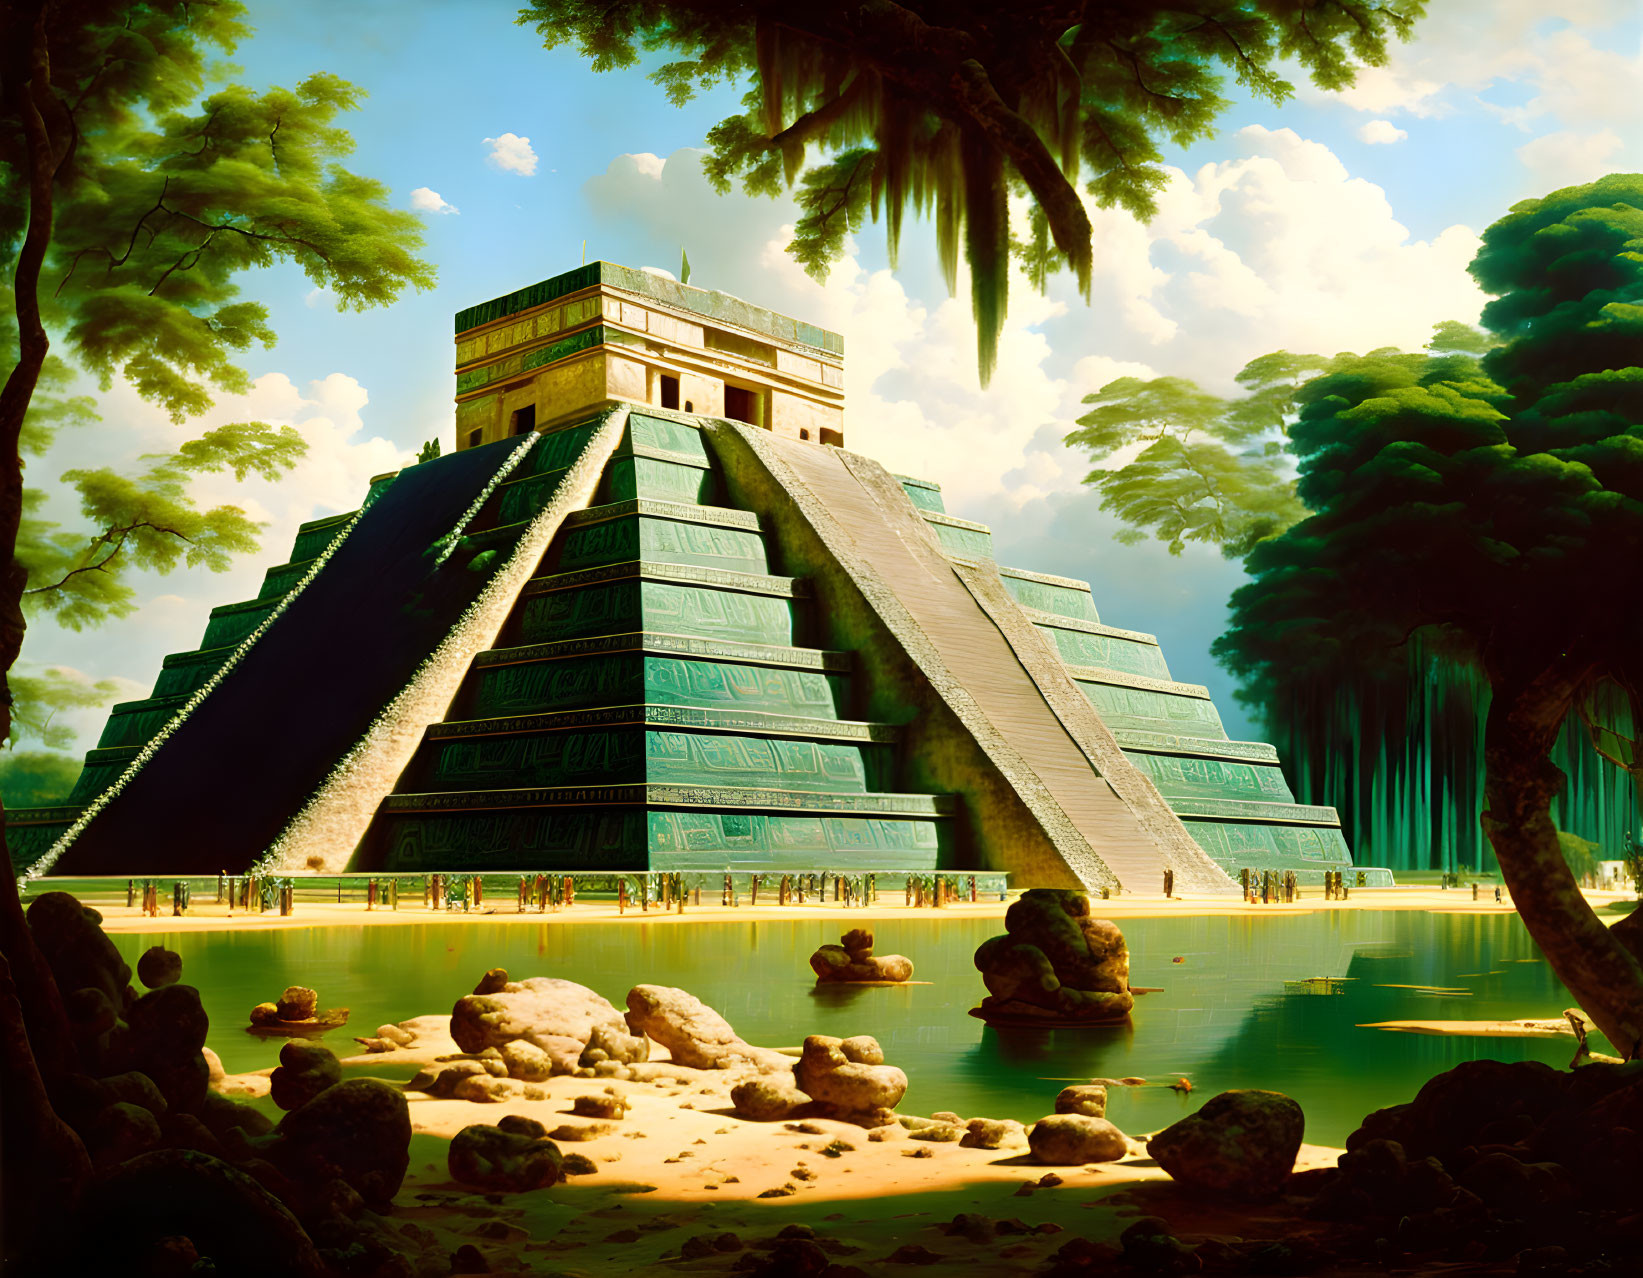 Ancient Mesoamerican pyramid with intricate designs in lush green setting